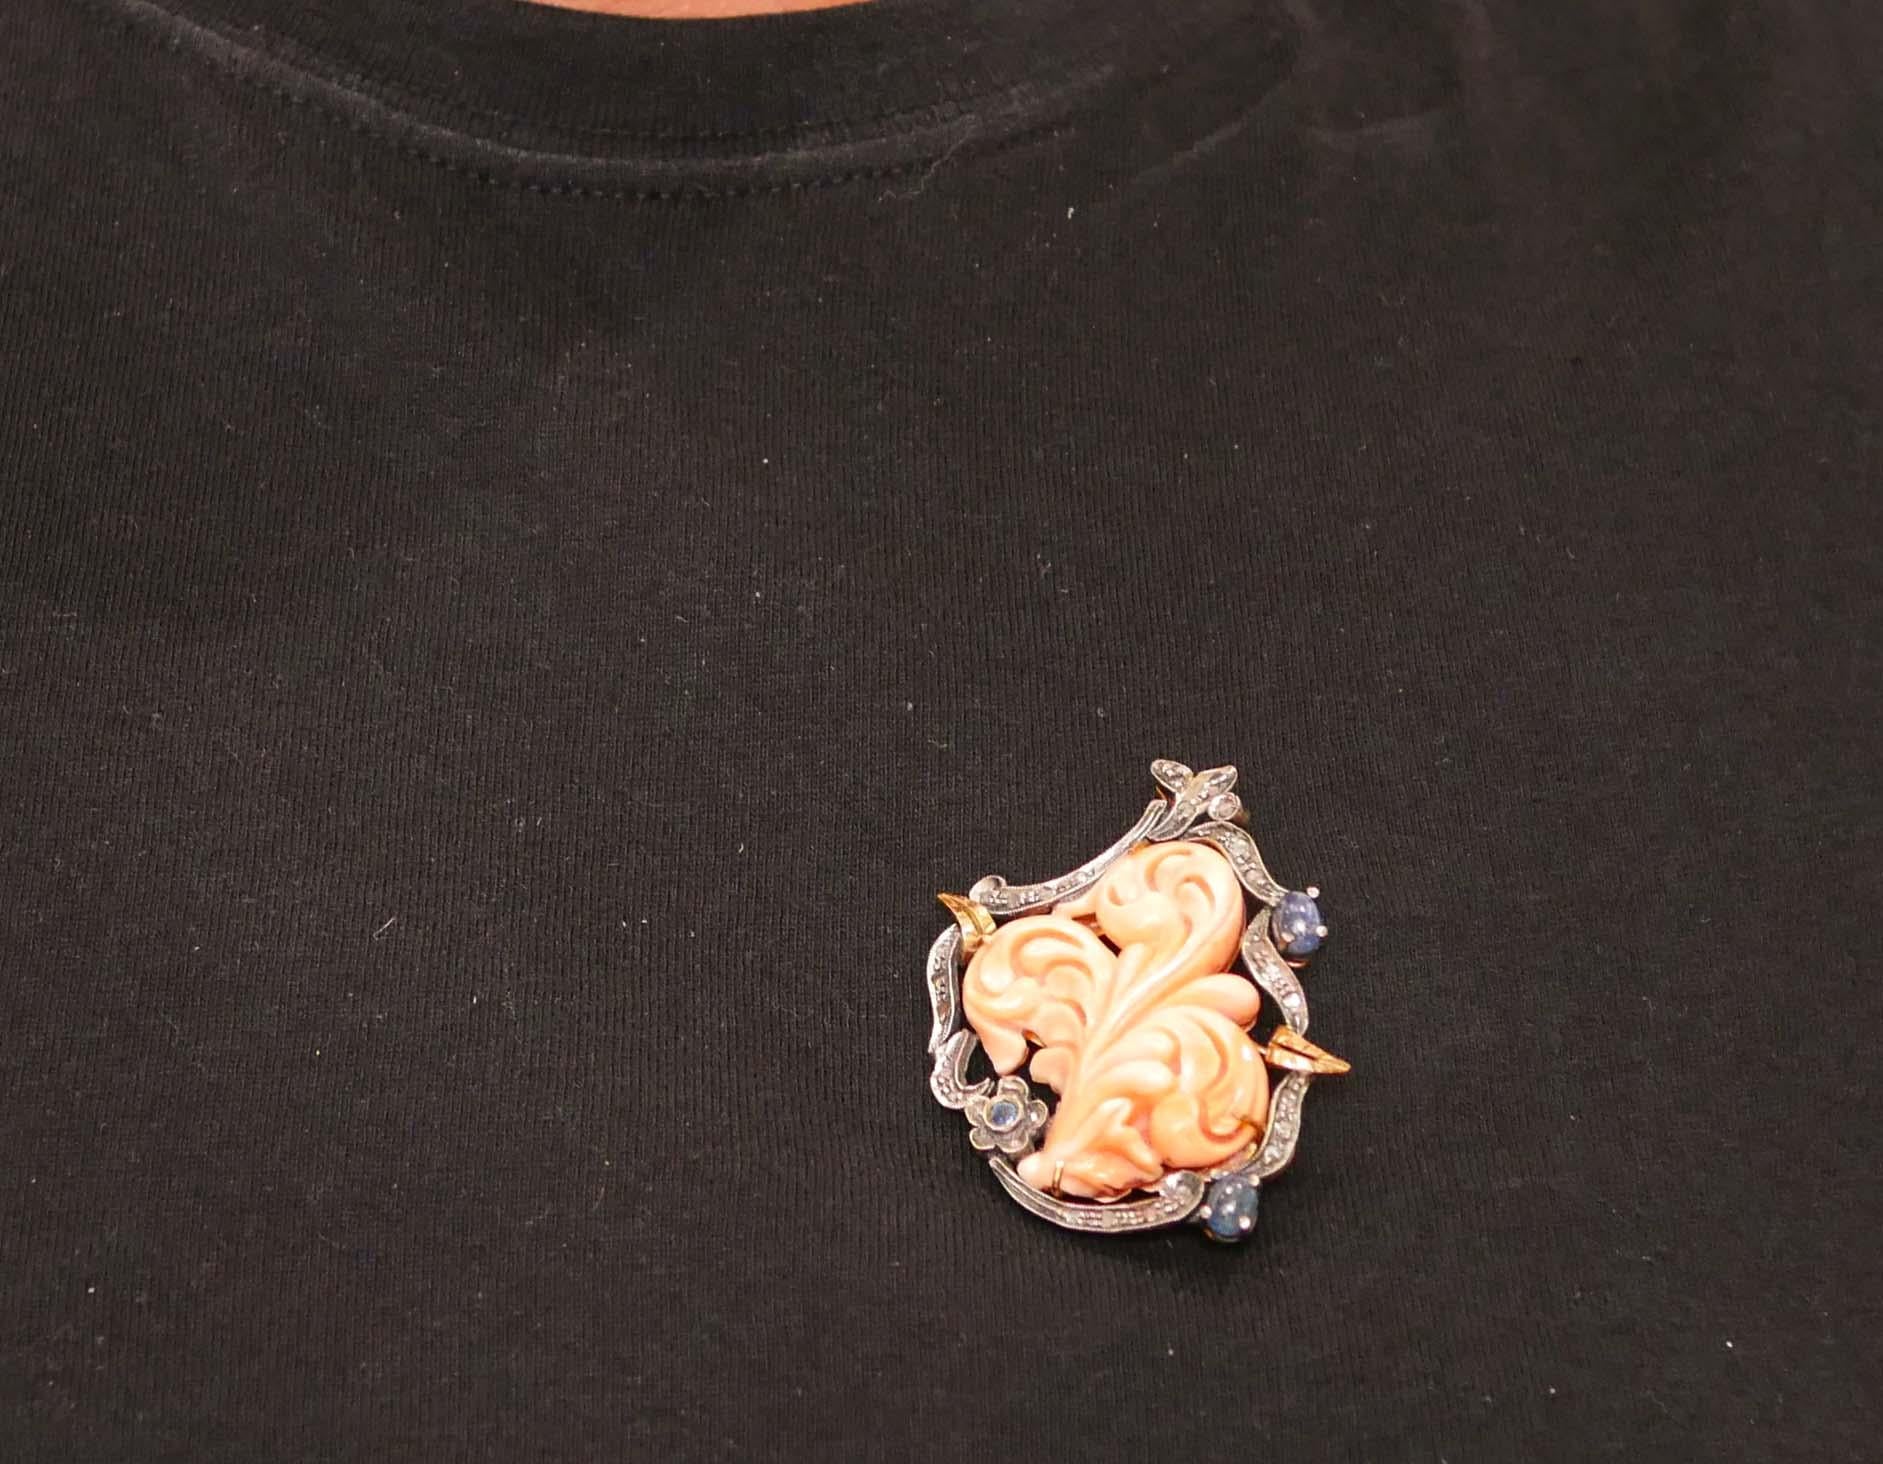 Coral, Sapphires, Diamonds, 14 Karat Rose Gold and Silver Brooch / Pendant. For Sale 2